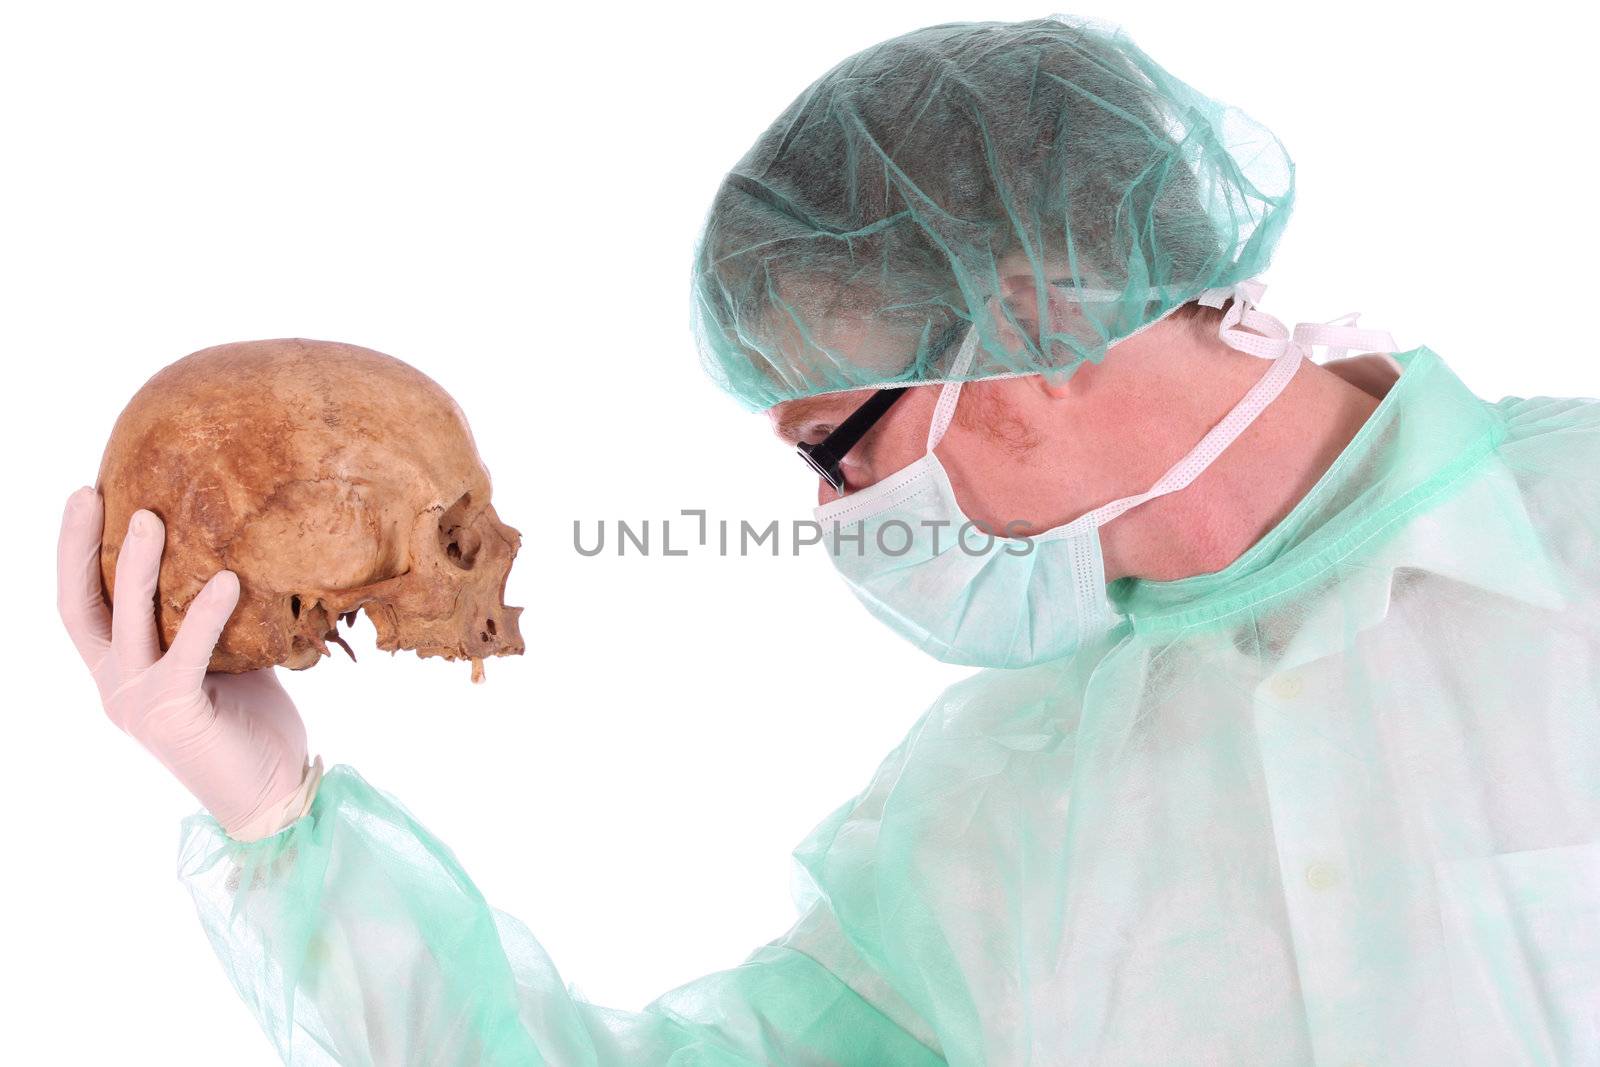 Details surgeon with skull on white background